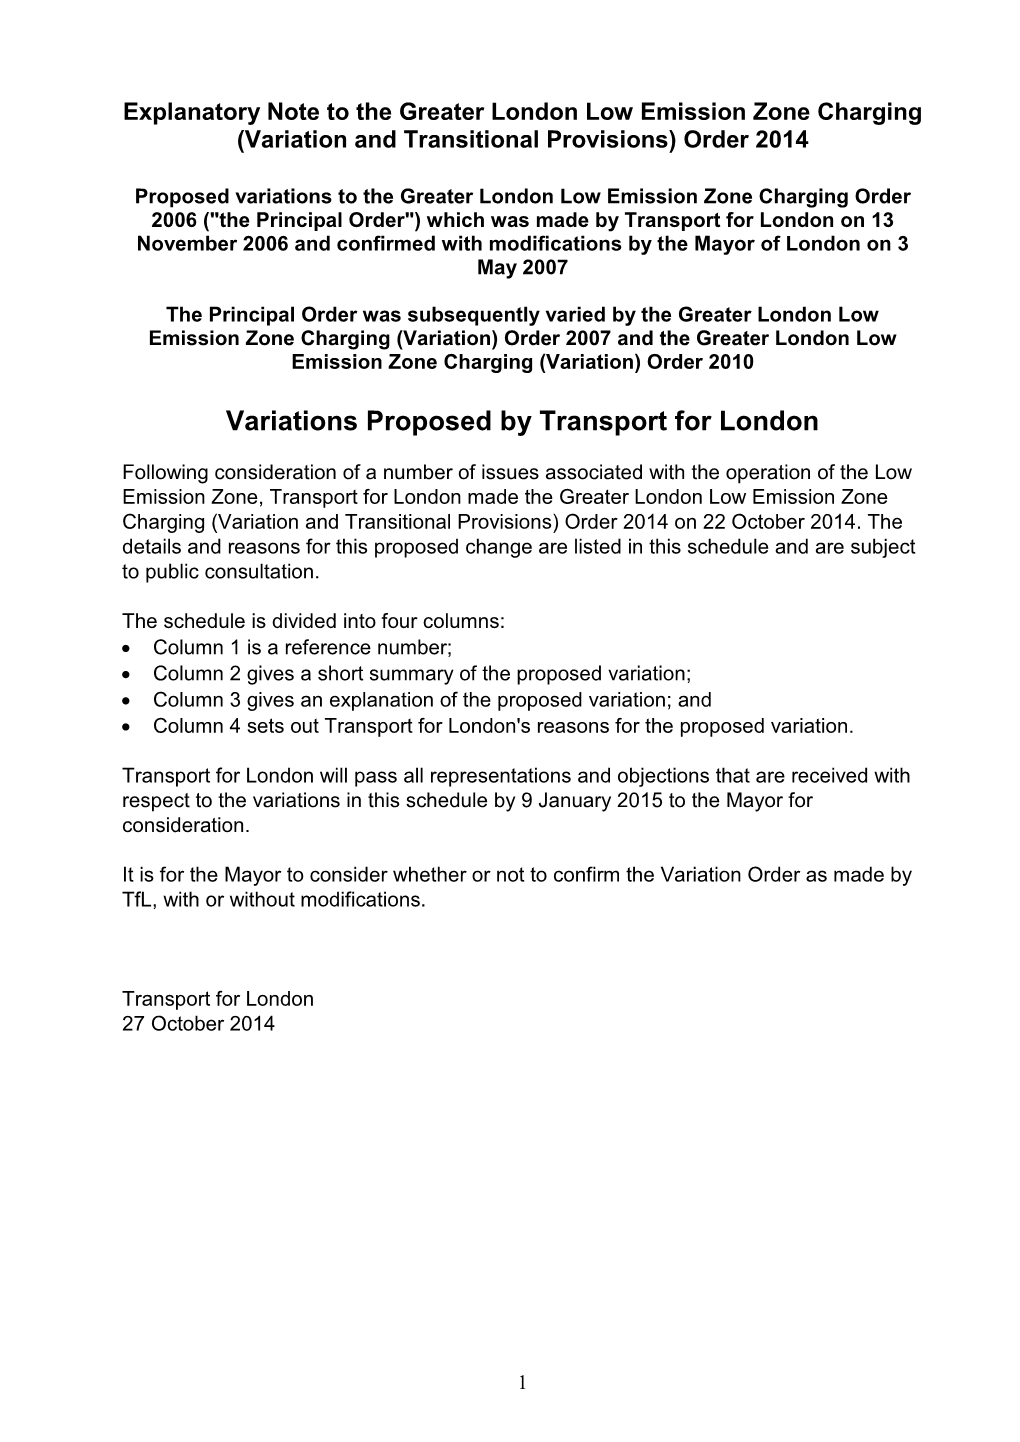 Proposed Variations to the Greater London Low Emission Zone Charging Order